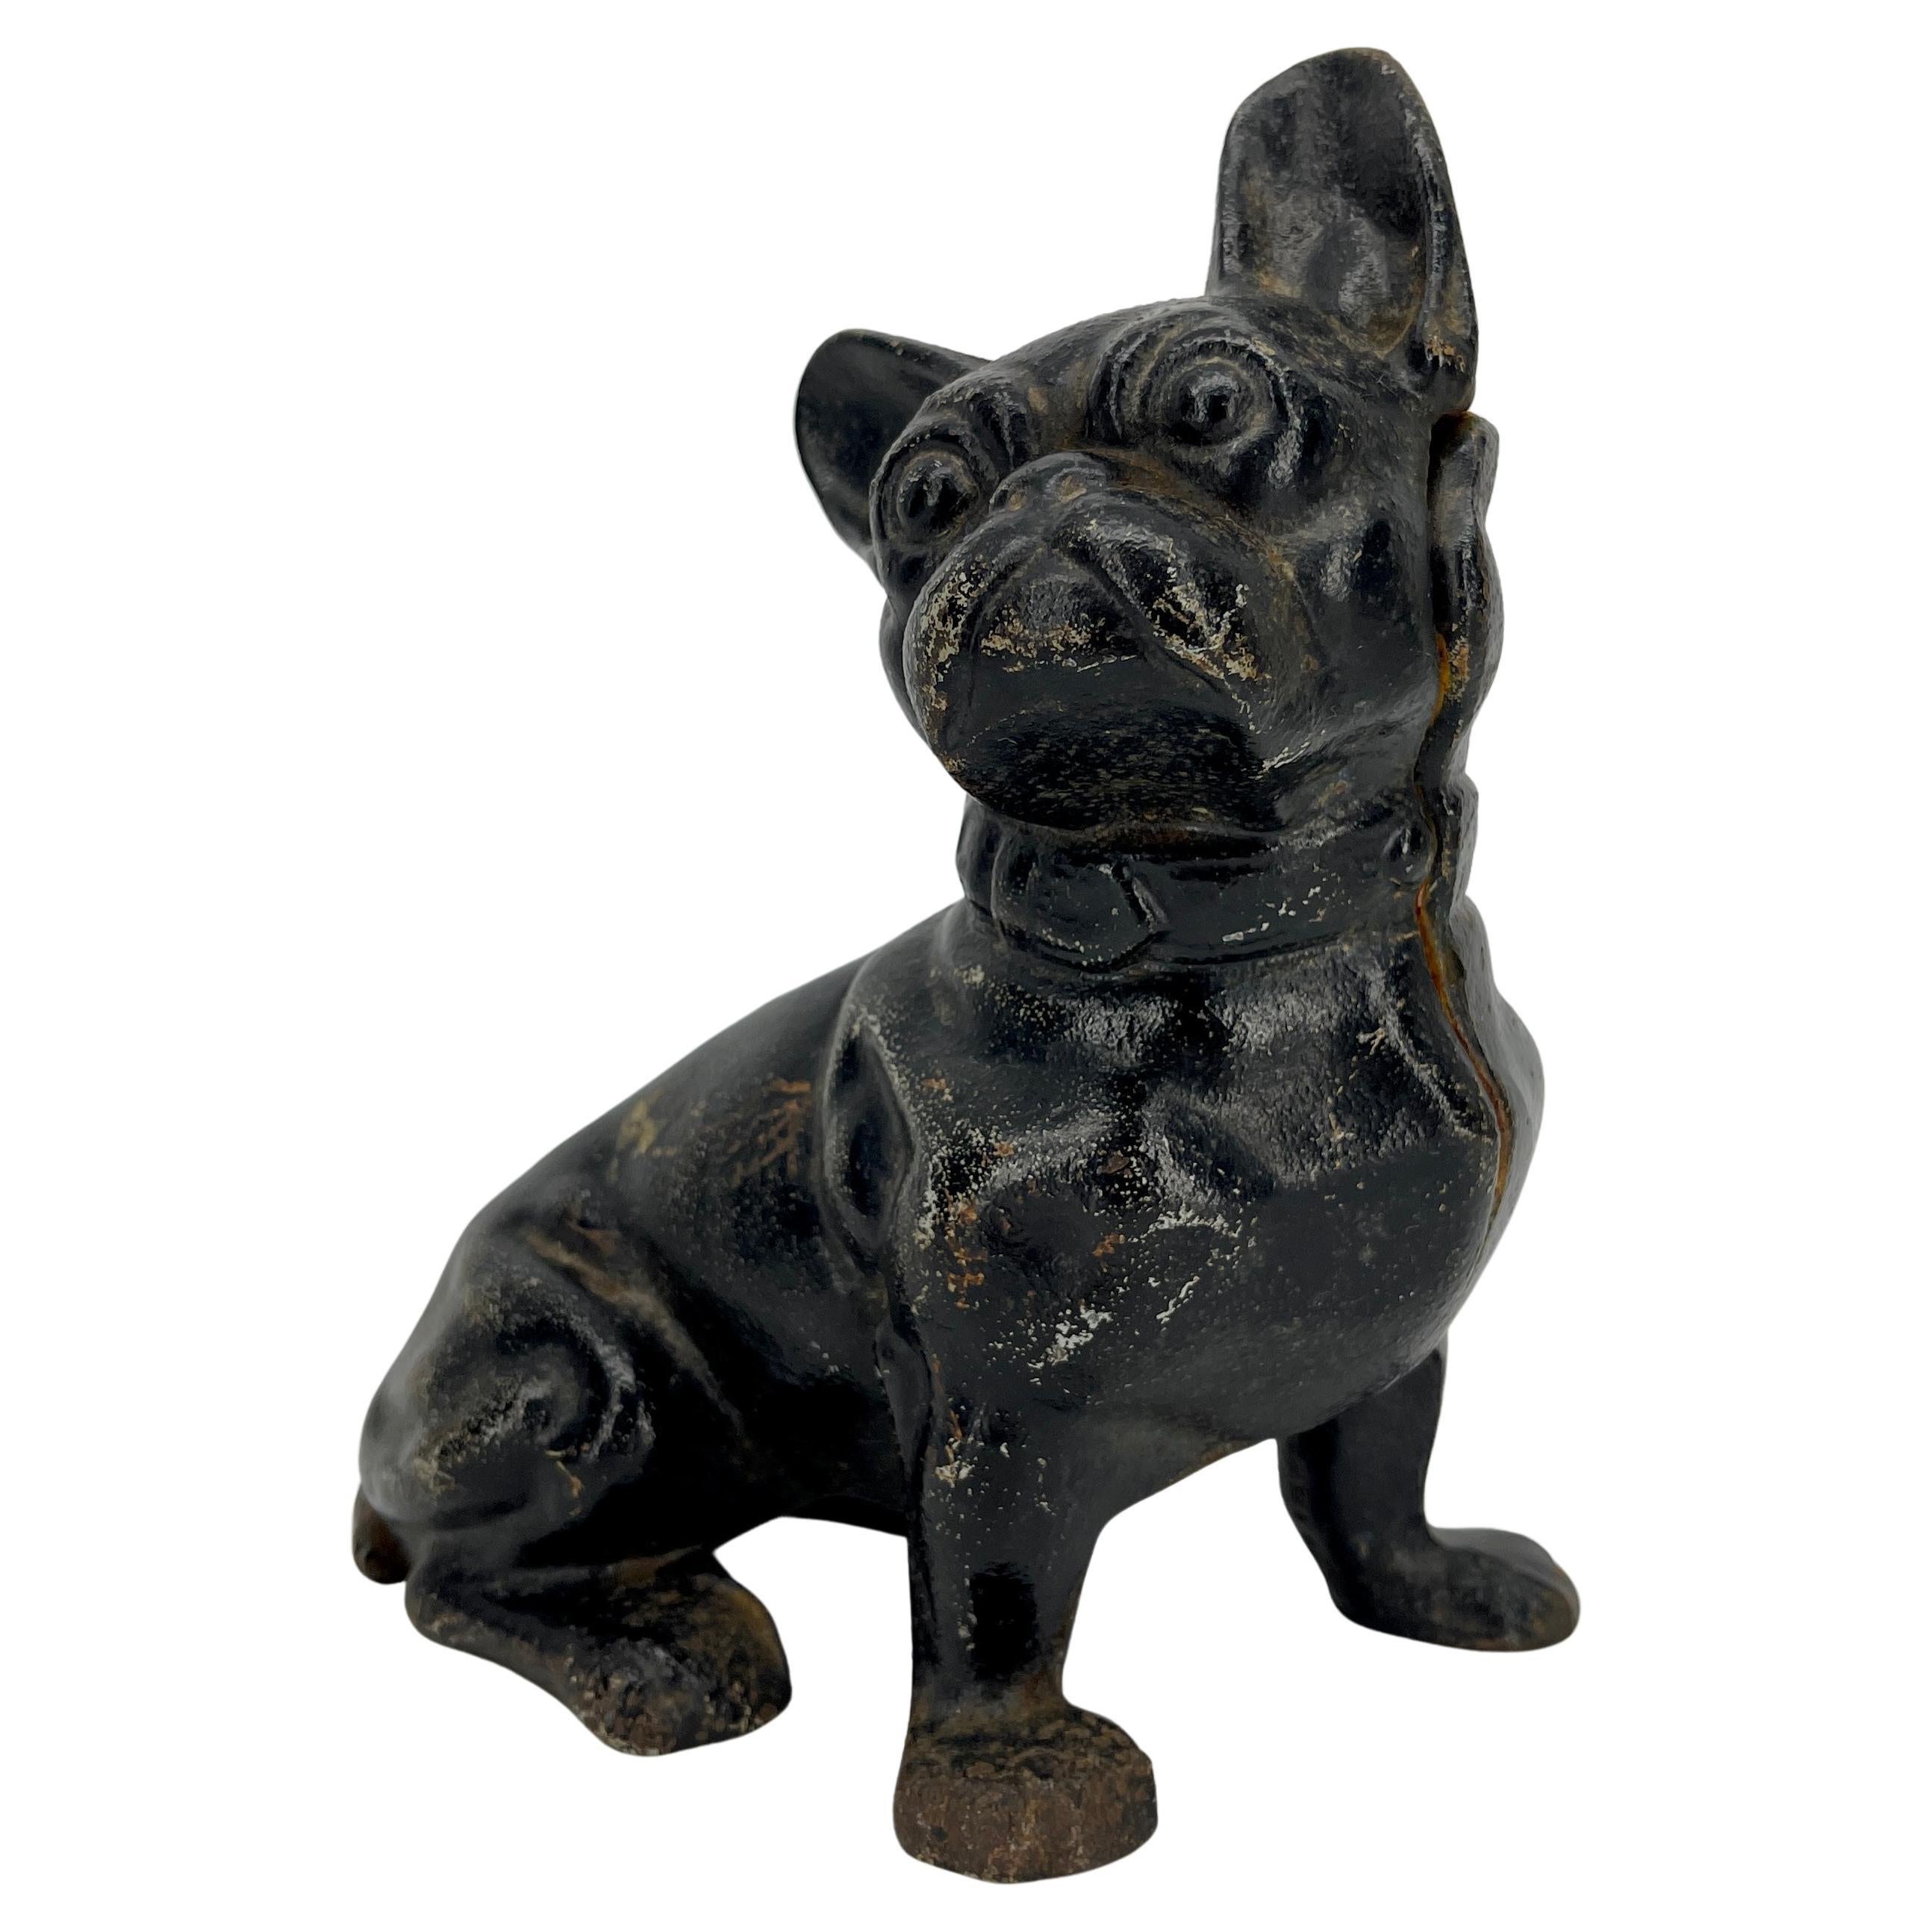 Black Hubley cast iron French Bulldog Money Bank or Doorstop. 
Heavy, compact, muscular and handsome, the Hubley doorstops hailing from Lancaster, Pennsylvania, have become Classic antique treasures. A wonderful collectible, the doorstop has a